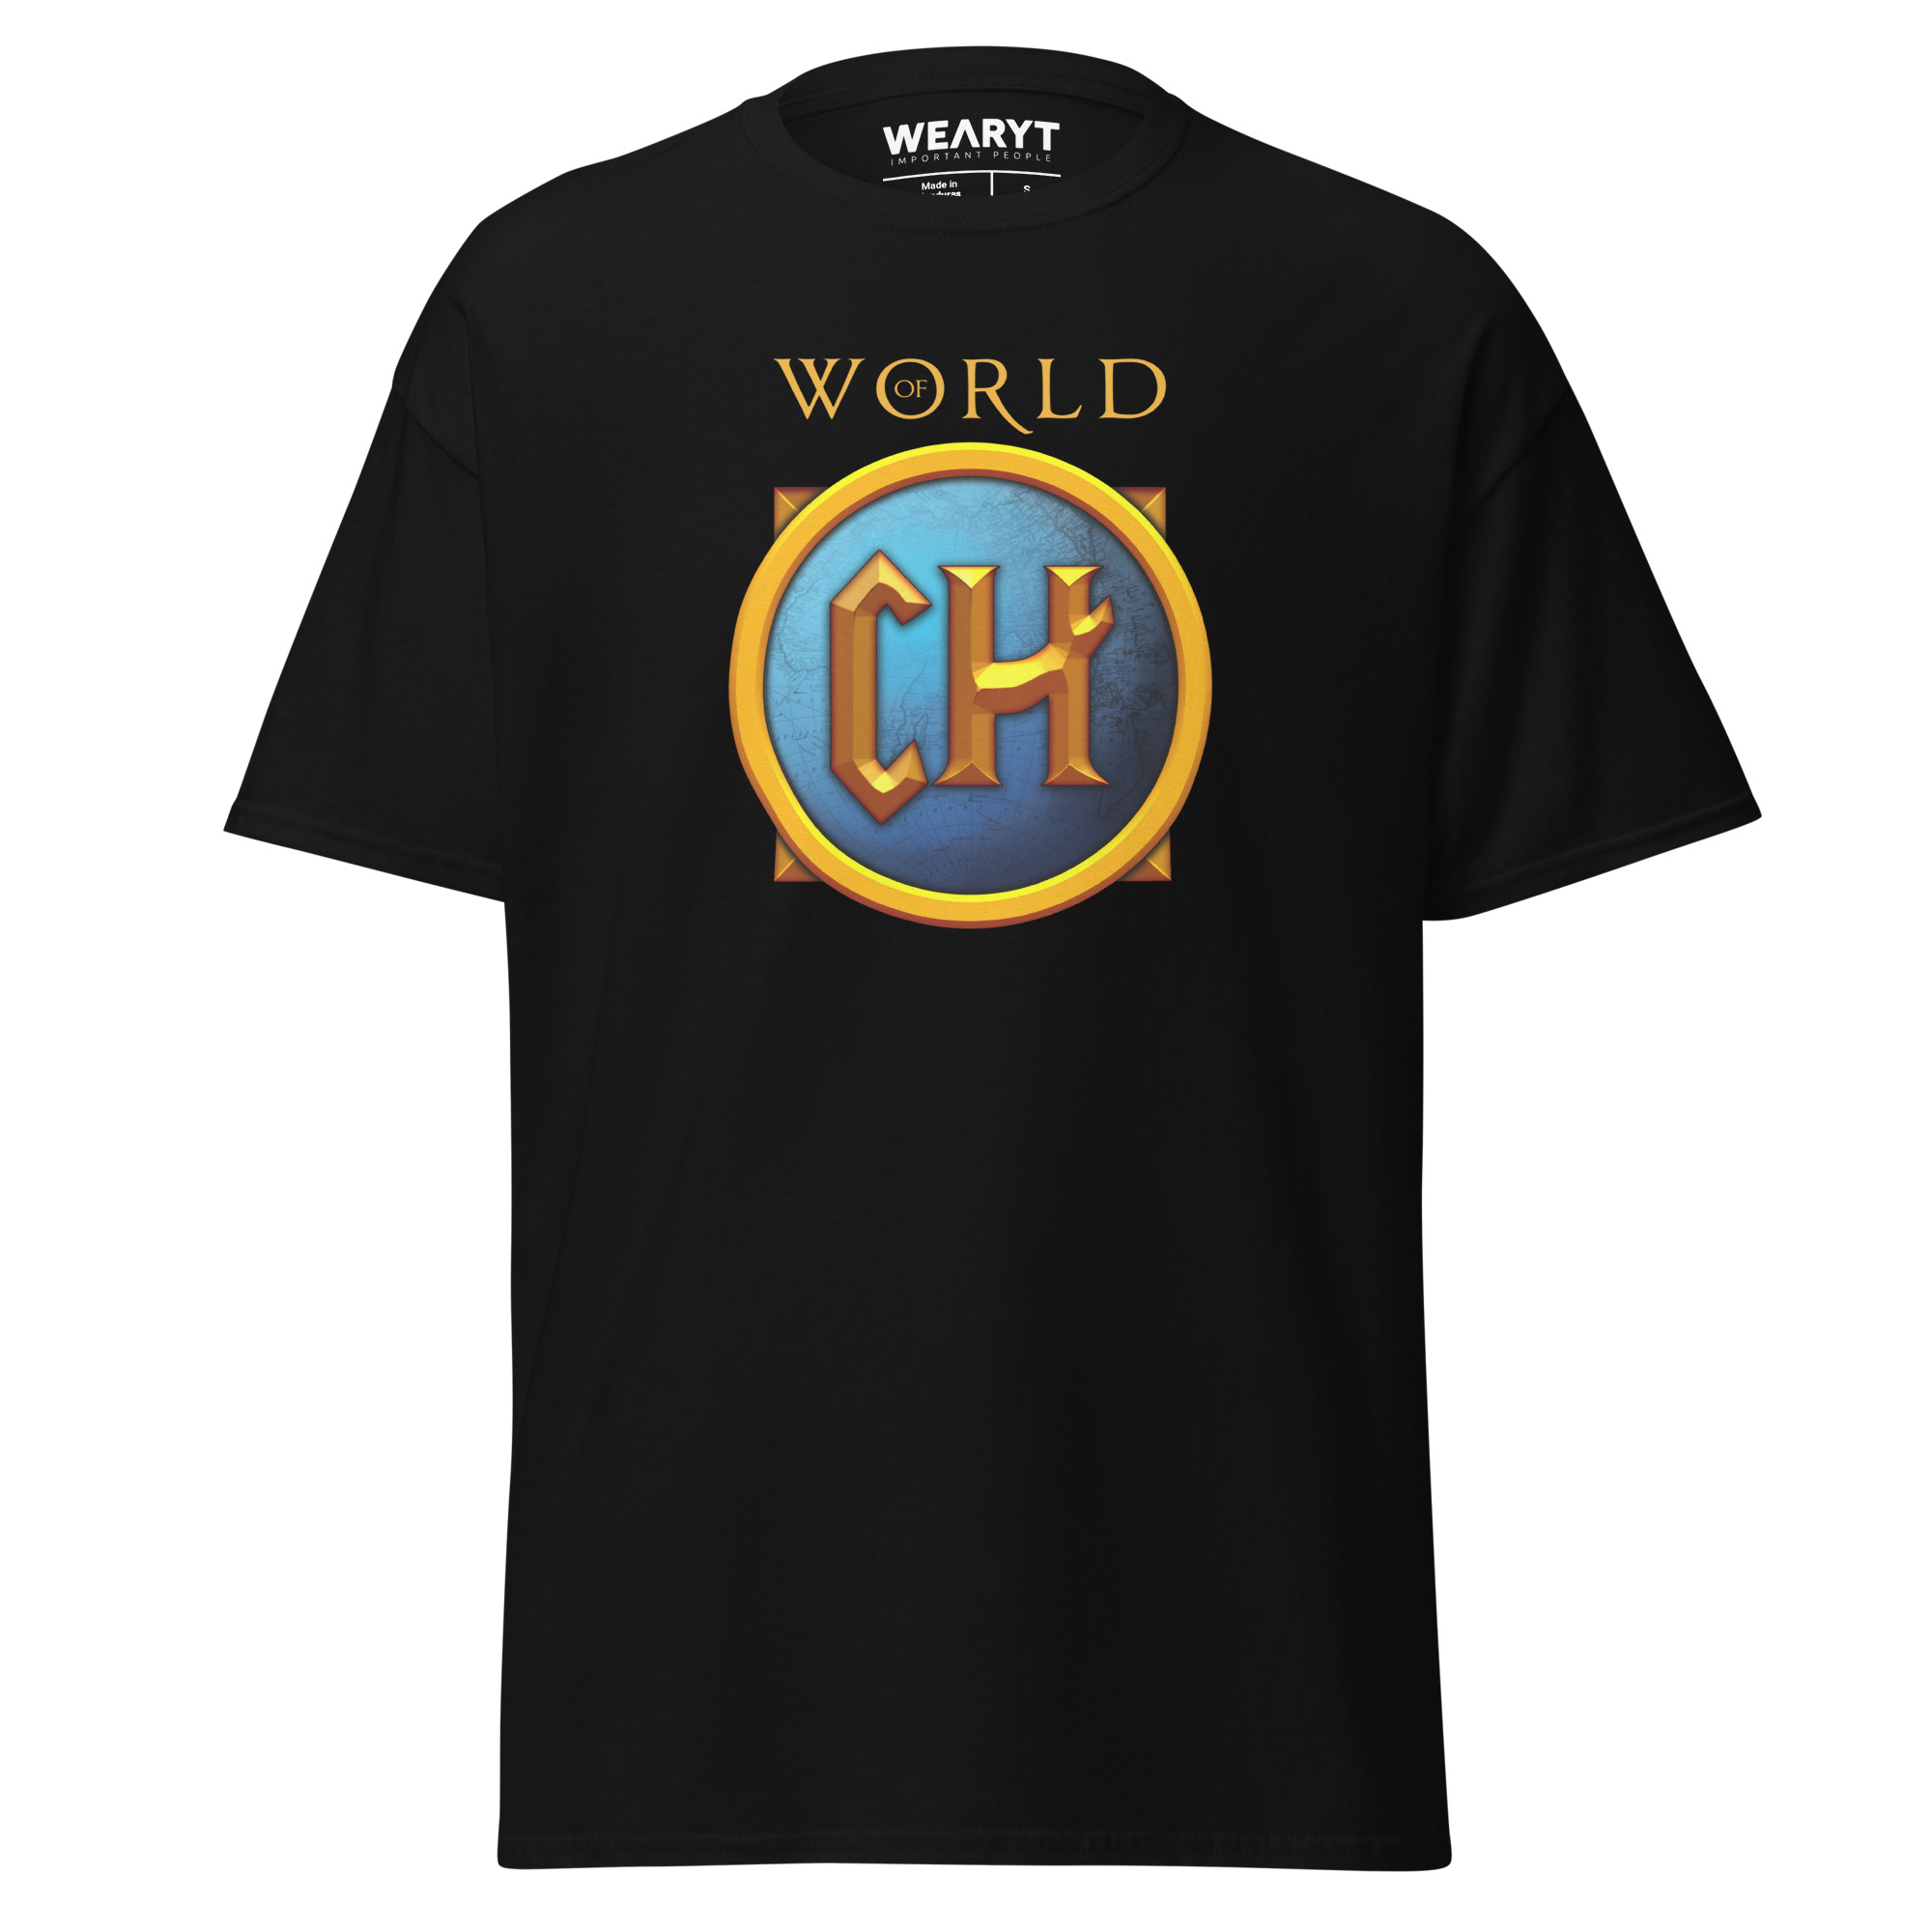 T-shirt – Gaming – World of CH Men's Clothing Wearyt